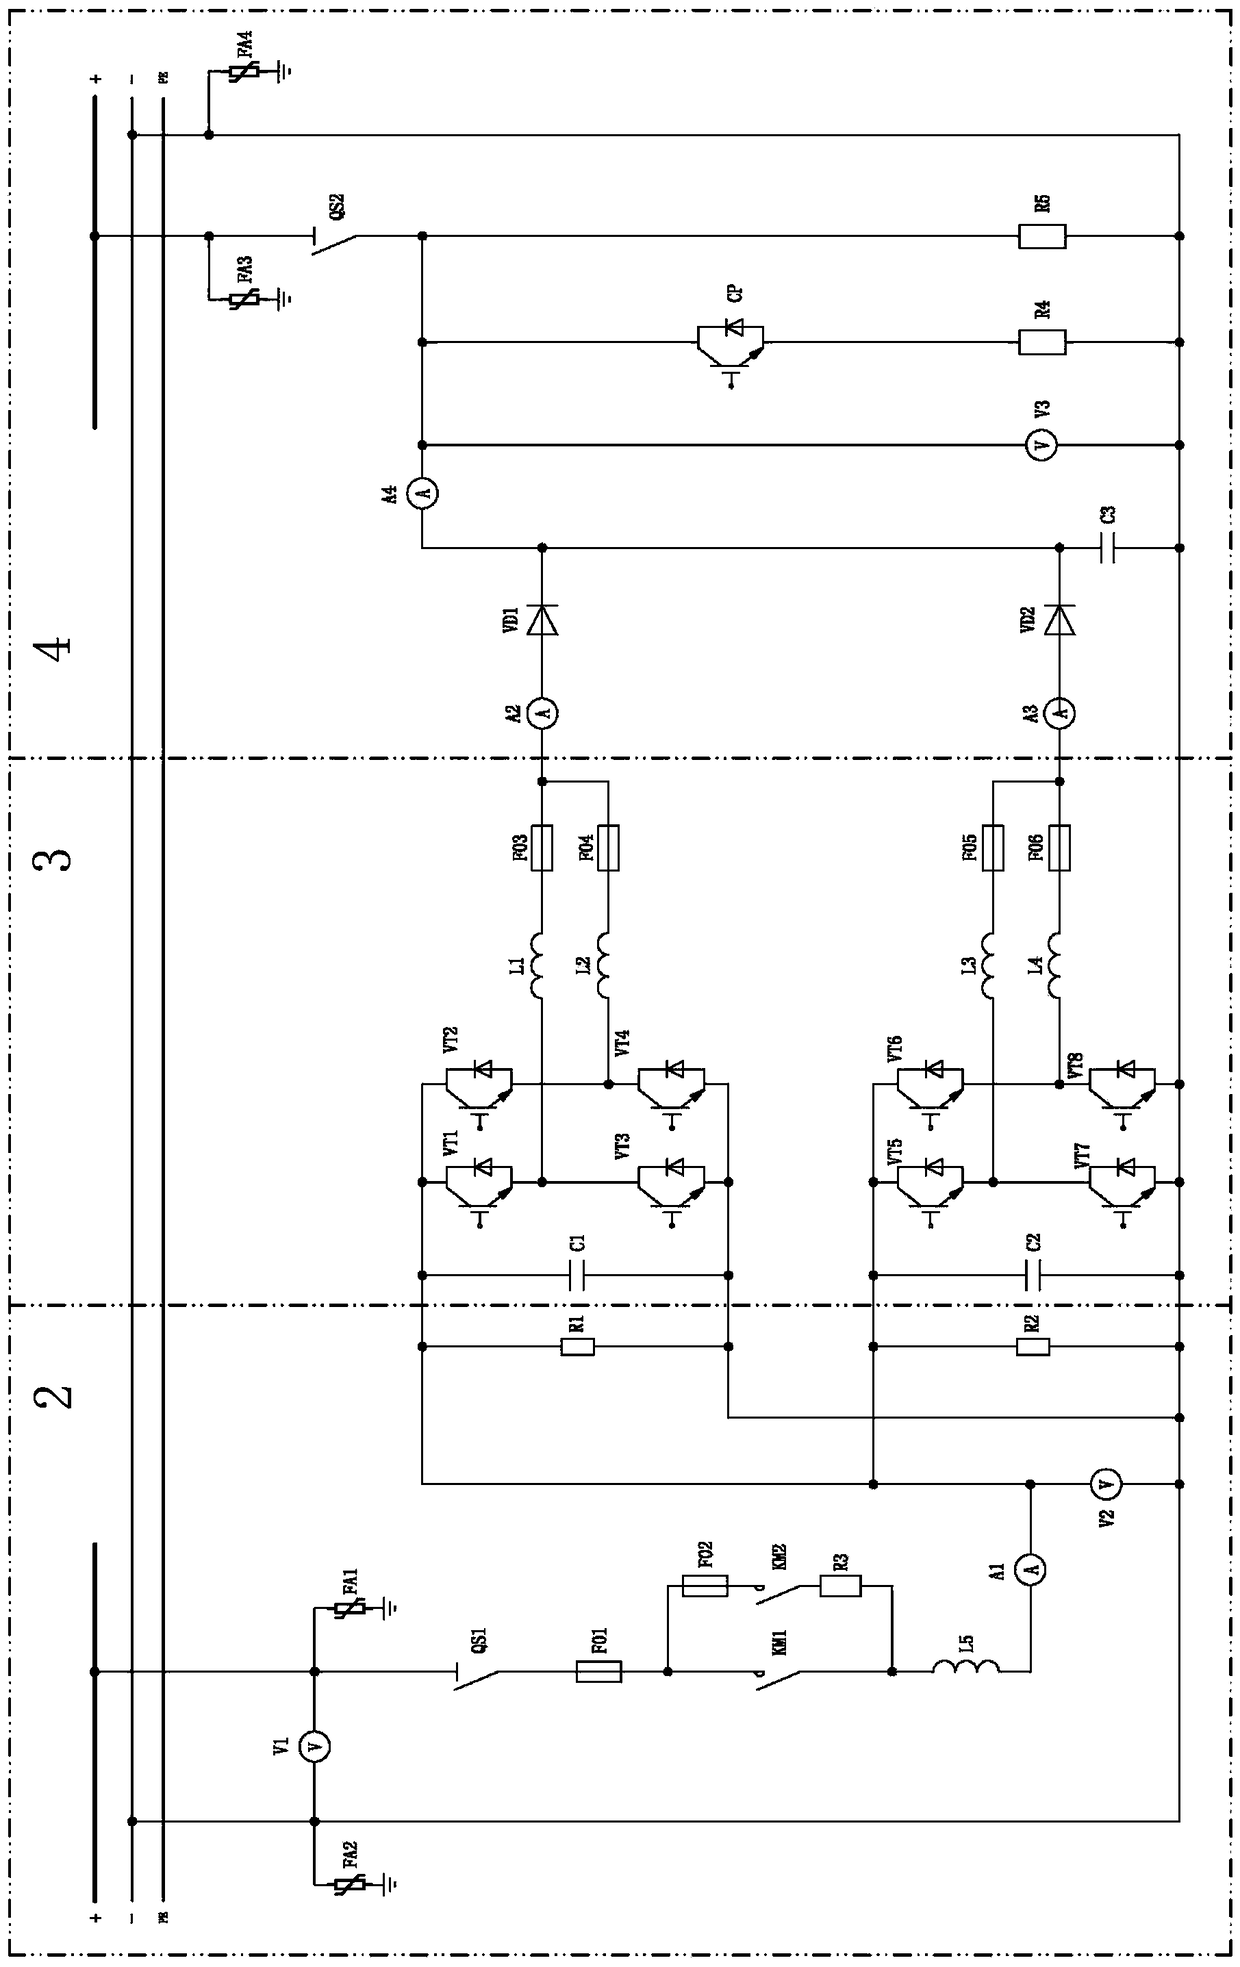 A high-power charging circuit and device